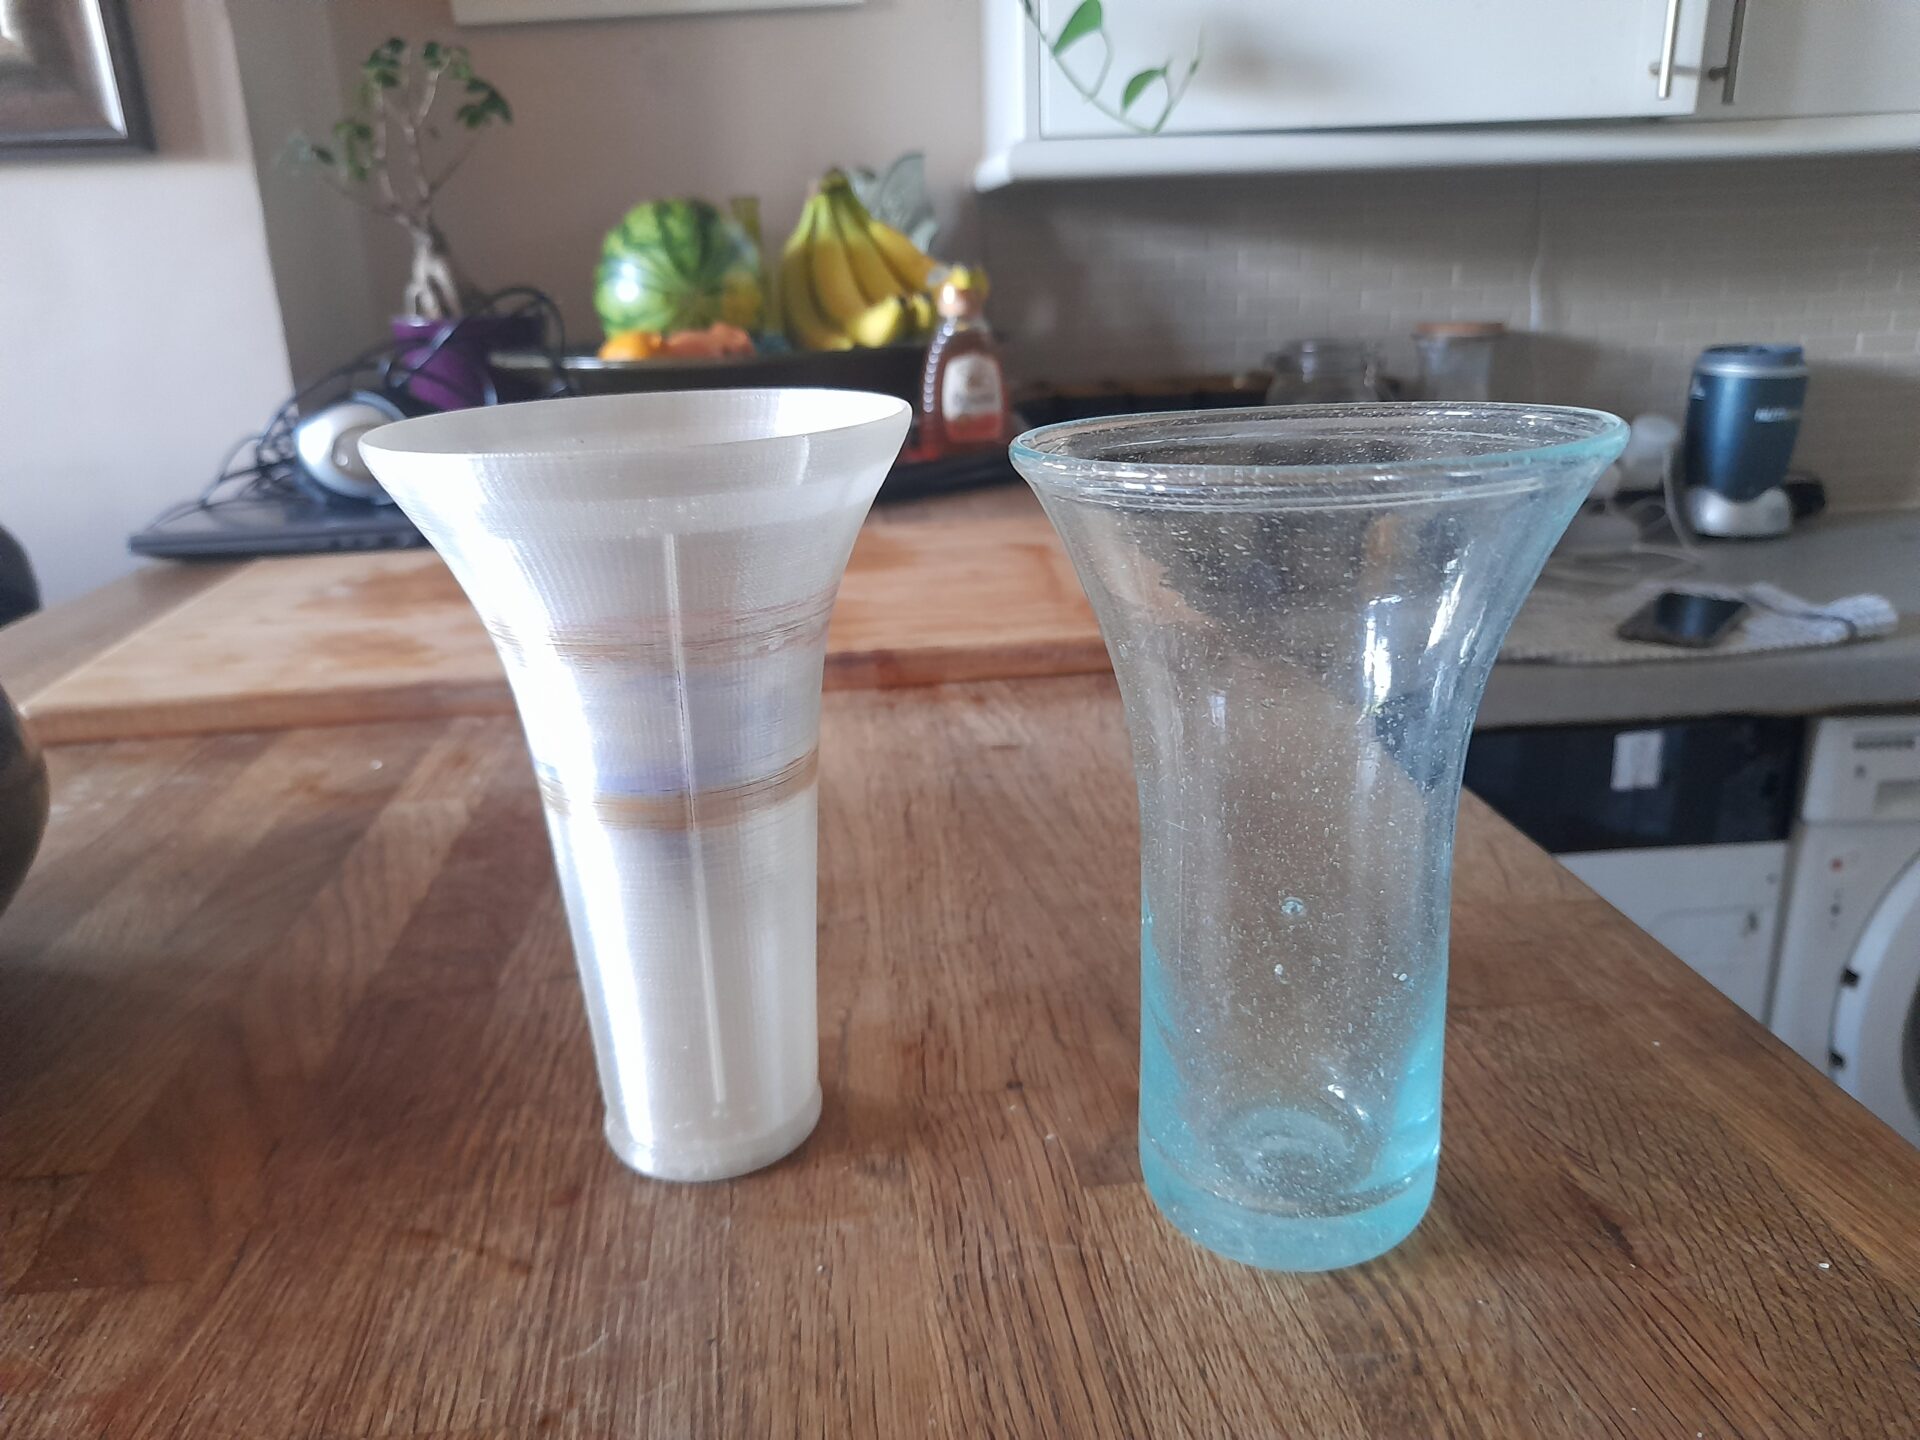 3D printed beaker prototype beside an authentic clear glass beaker from Cairo, Egypt.